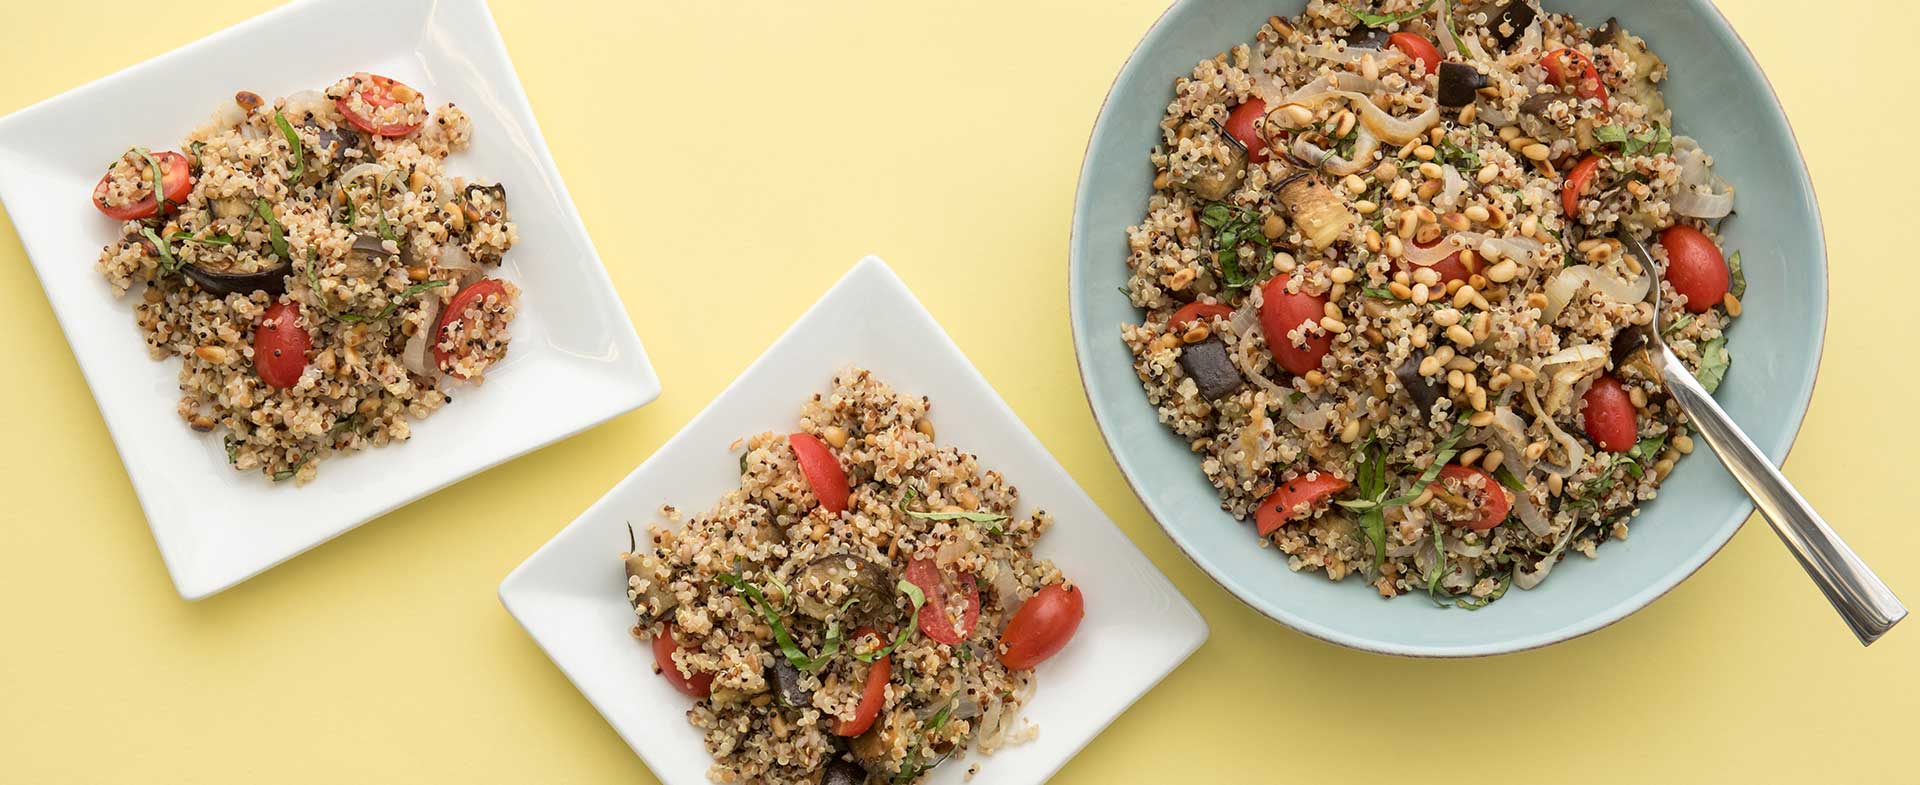 Mediterranean Summer Salad With Ancient Grains and Roasted Eggplant Recipe